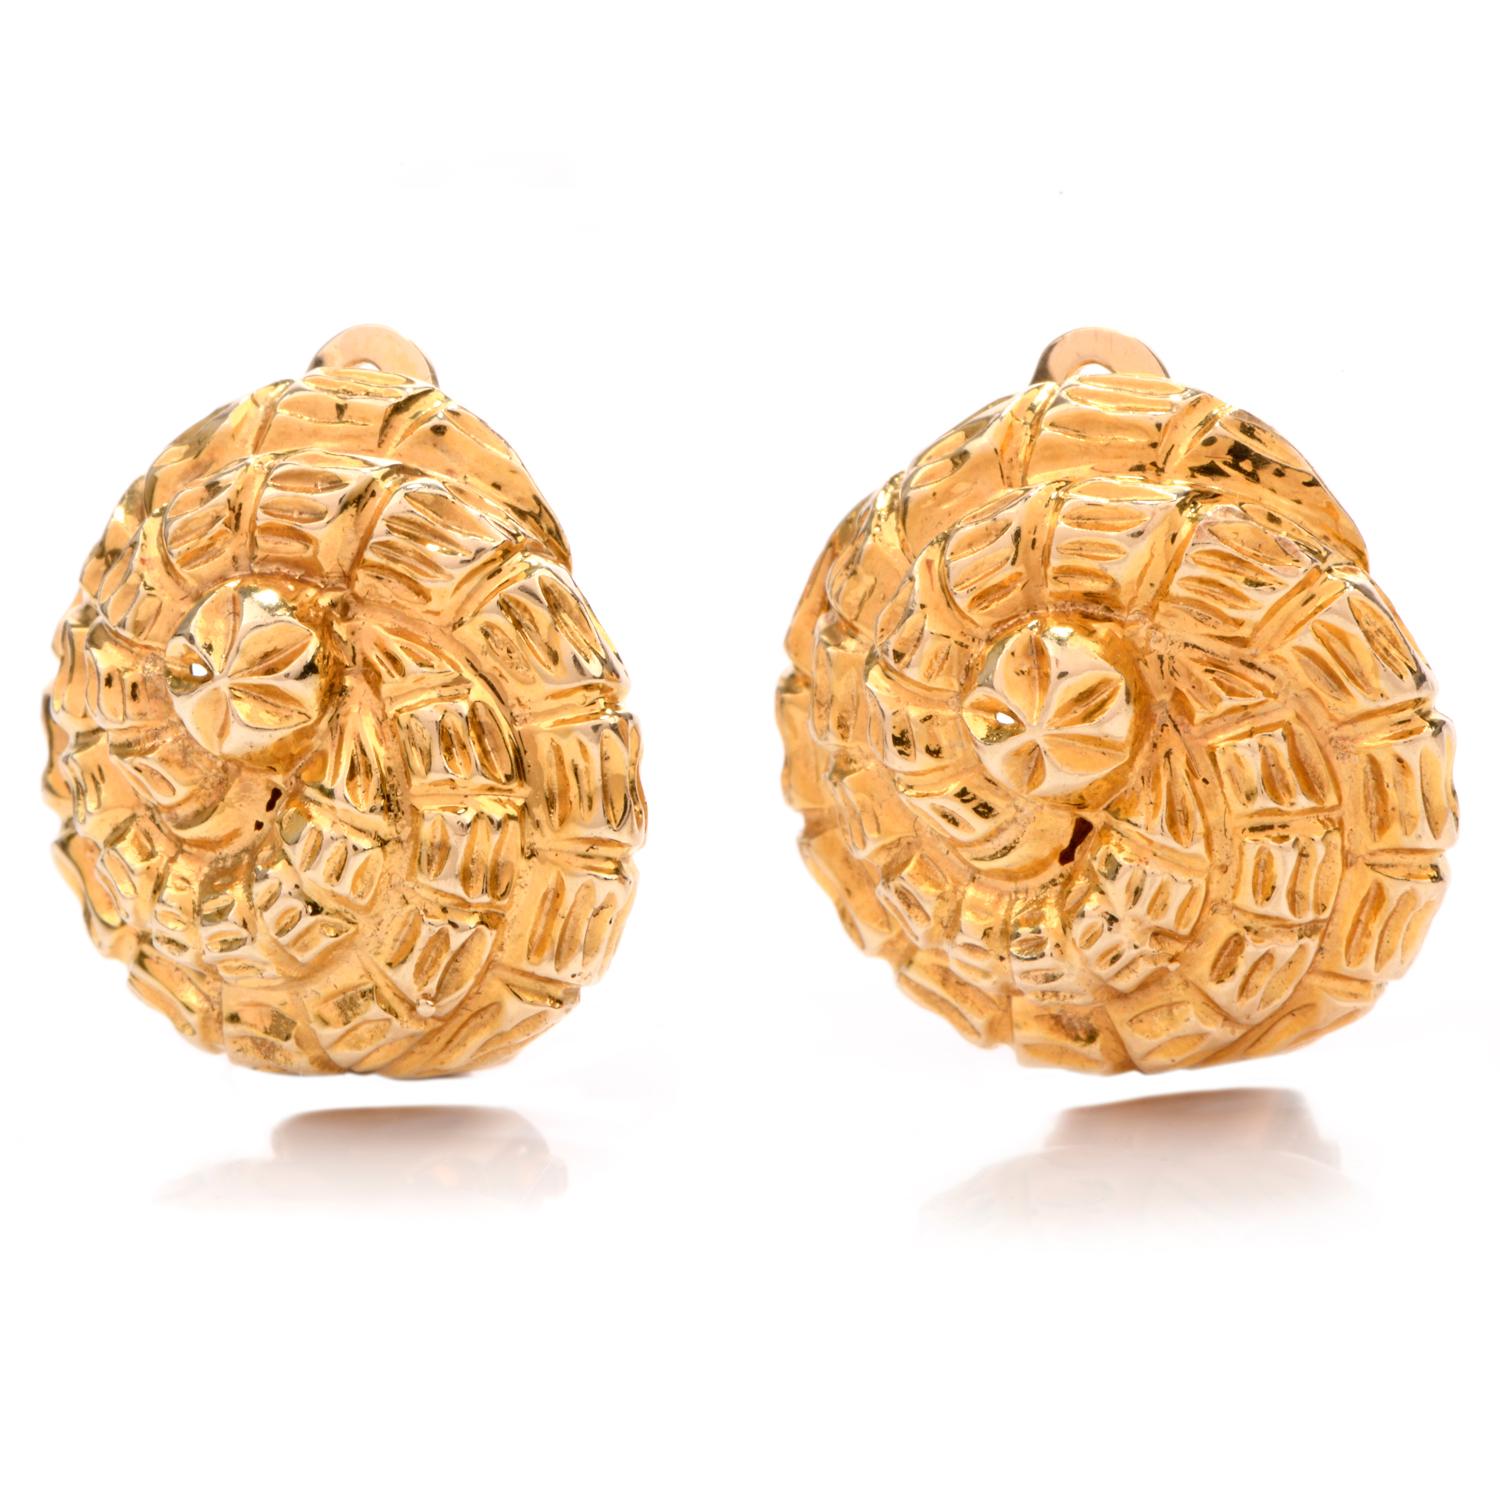 These stylish vintage earrings were inspired in a 

Shell motif and crafted in 14K gold.

Weighing appx. 14.7 grams and measuring appx. 20 x 20mm.

They are very comfortable to wear and secure with clip-on backs.

Stamped 14K.

Remain in Pristine